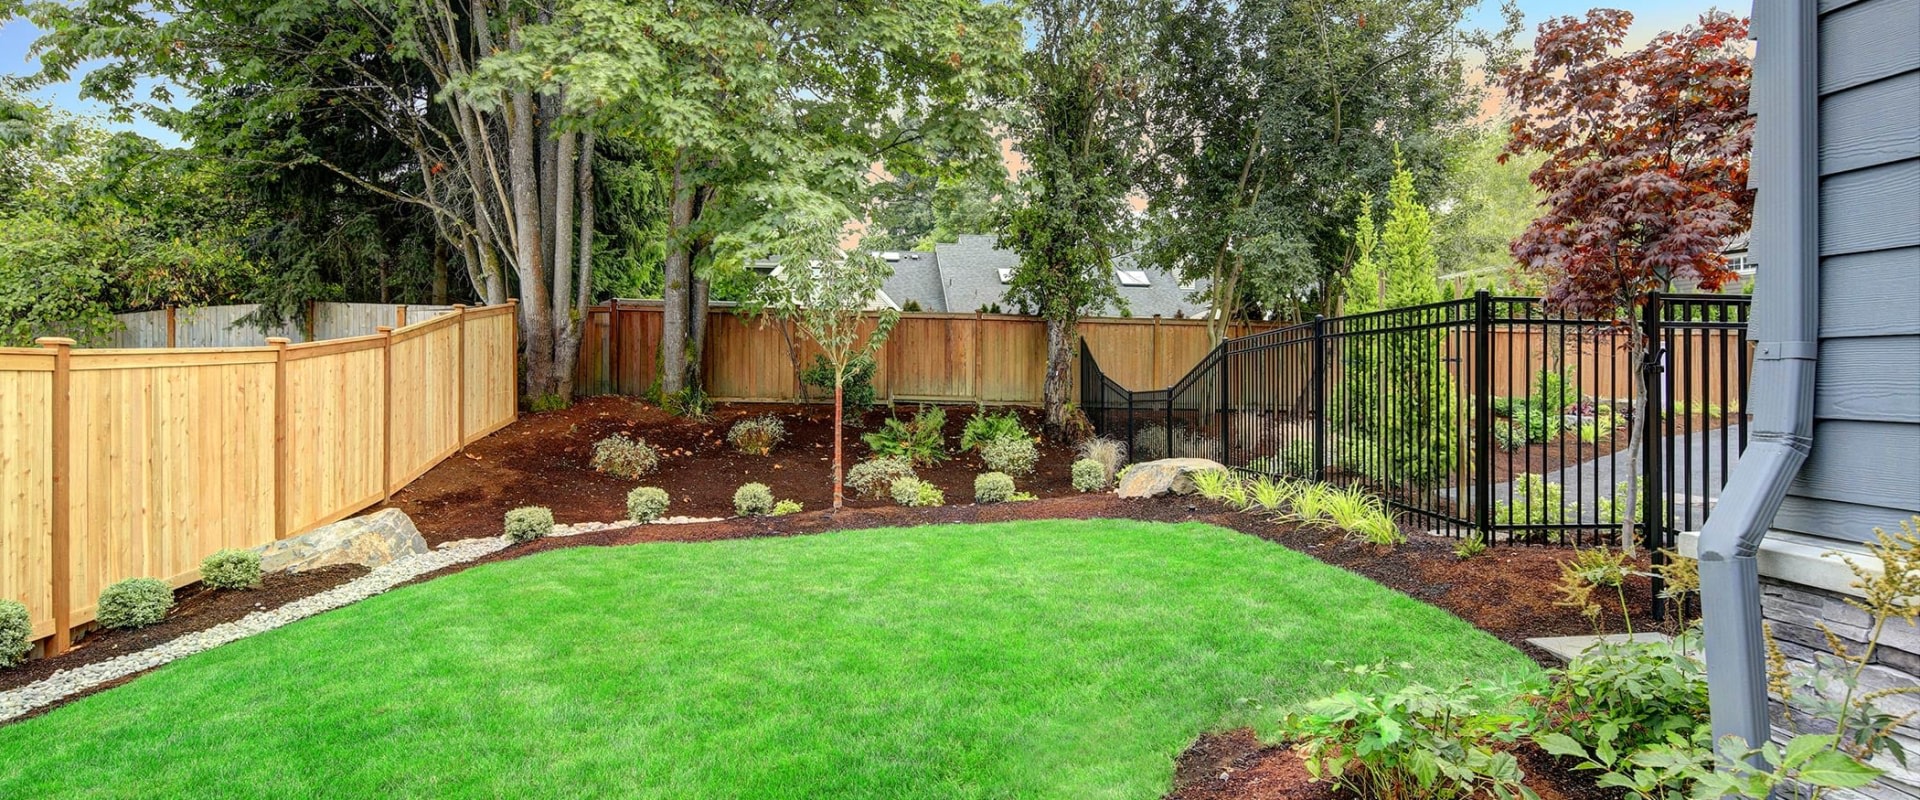 Creating Your Dream Yard In Lubbock: Landscaping Services And Best Tree Trimming Solutions